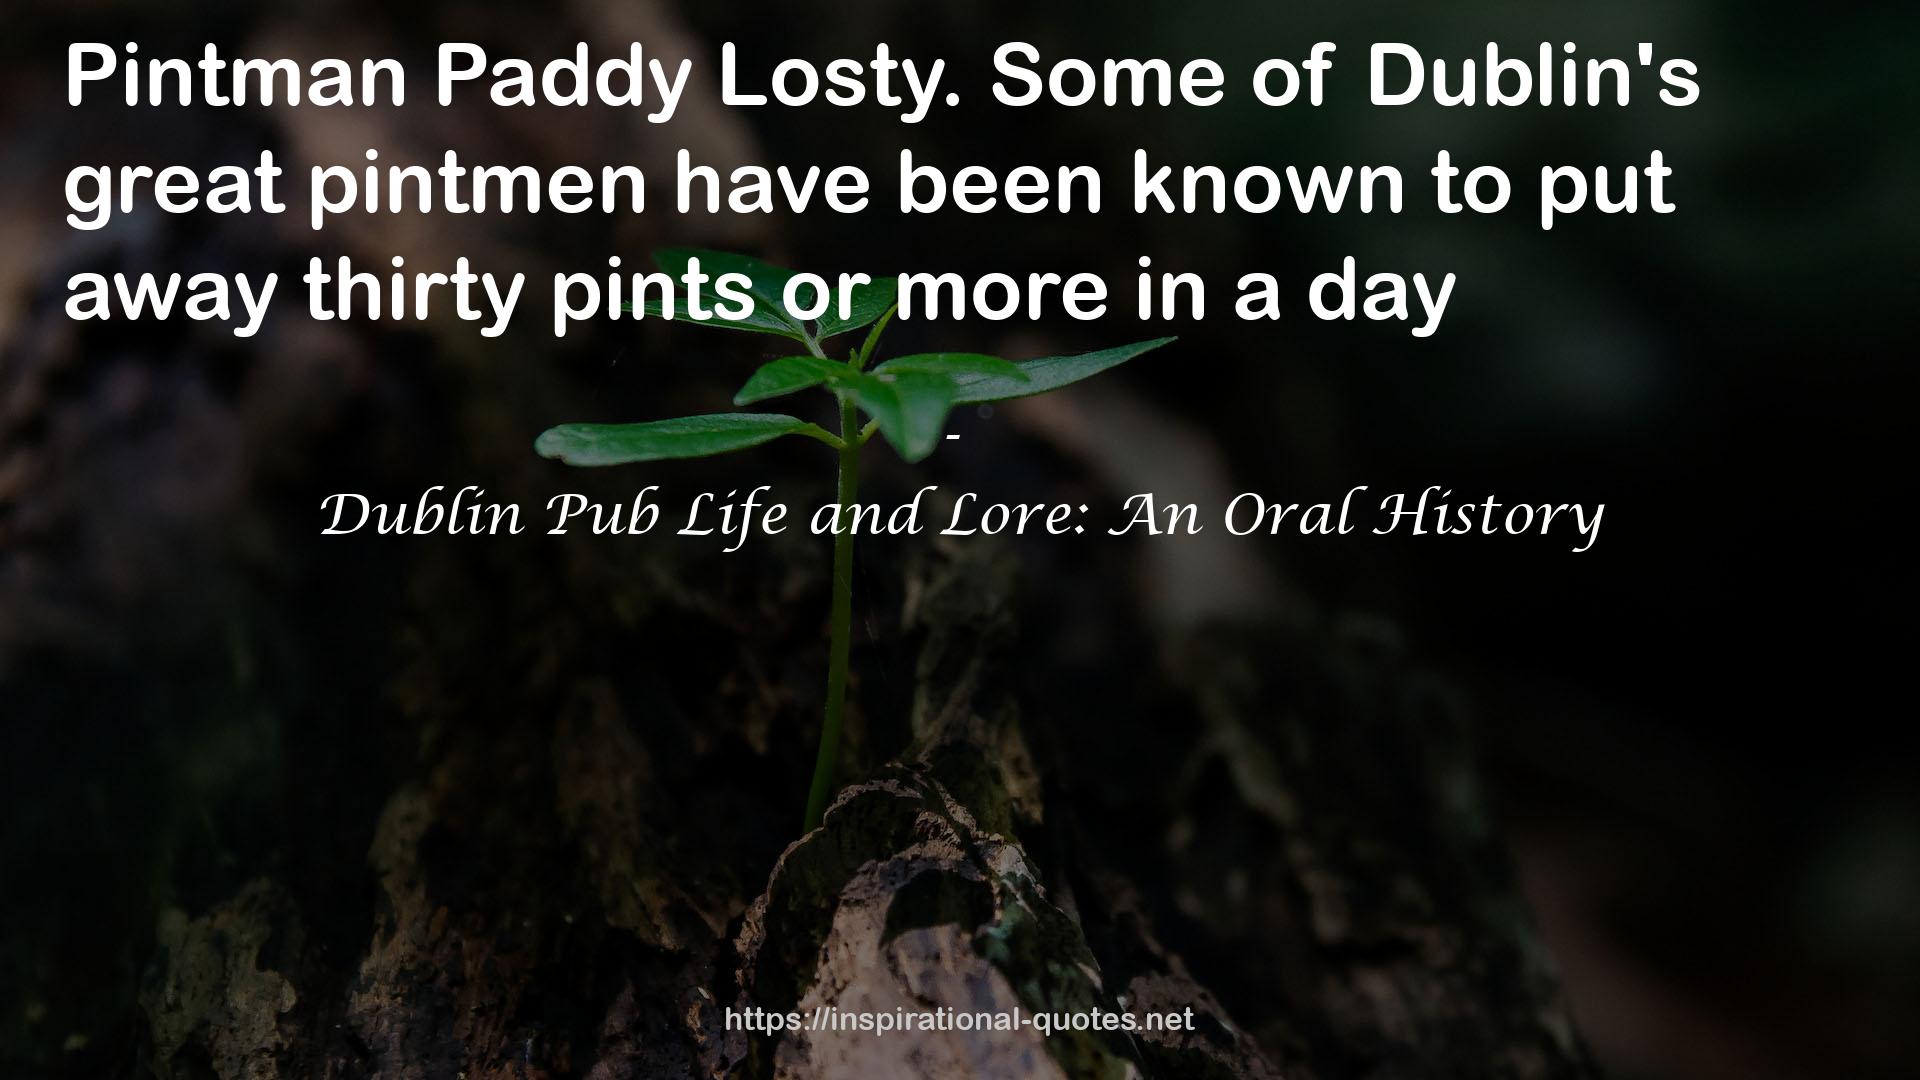 Dublin Pub Life and Lore: An Oral History QUOTES